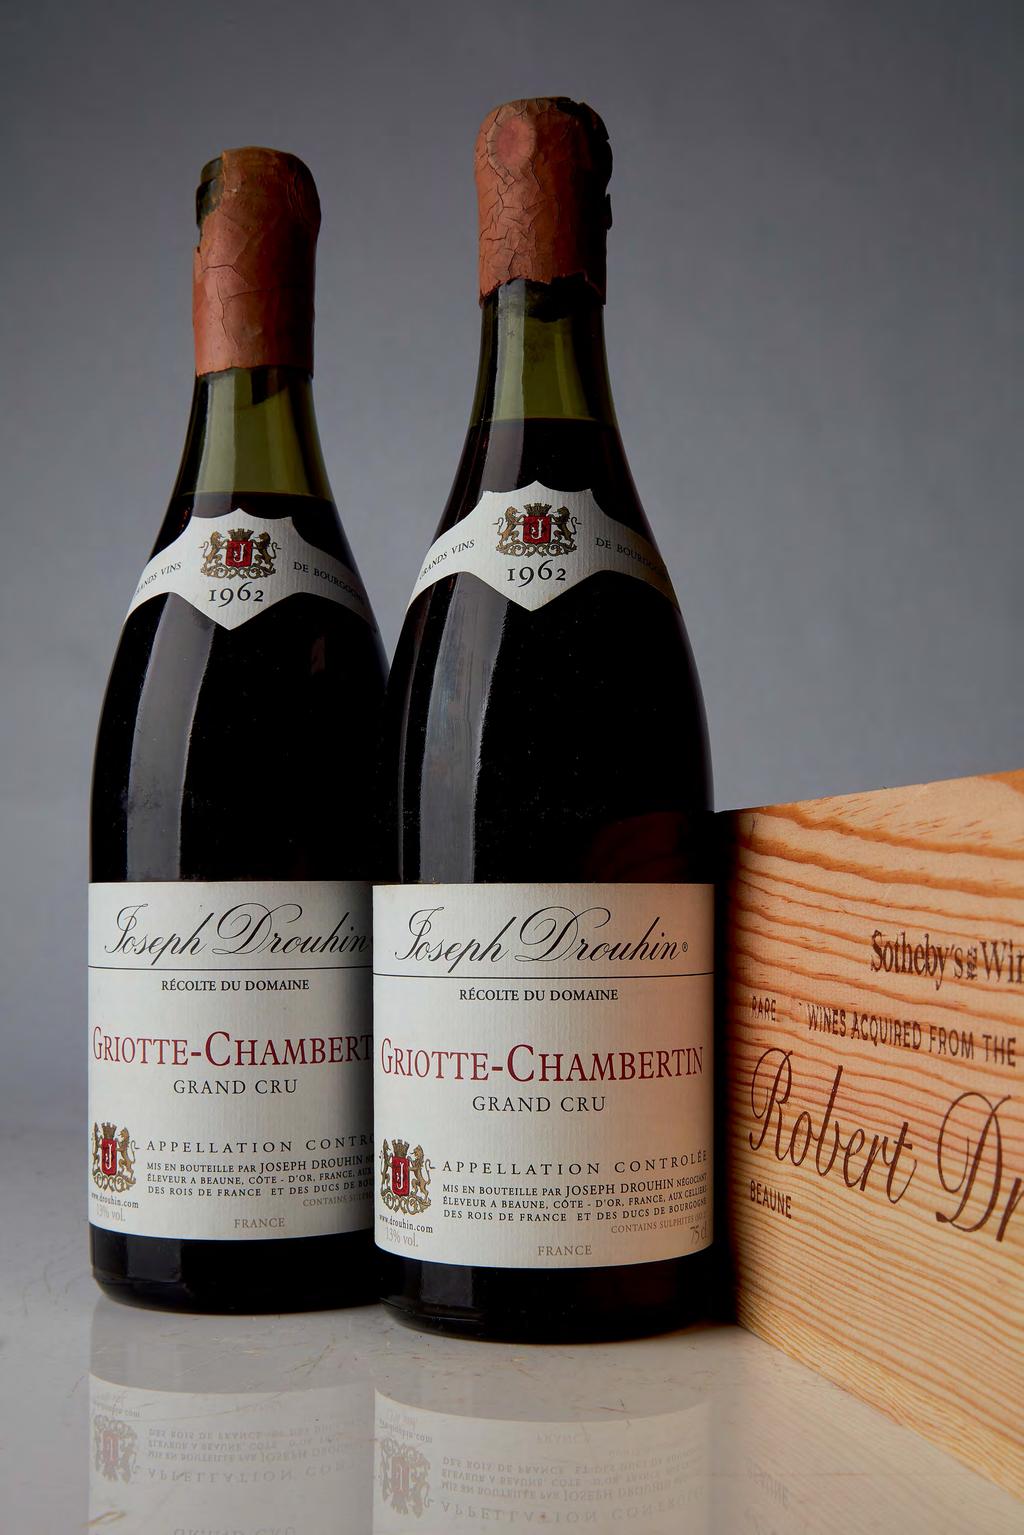 Located next to Chambertin Clos de Bèze, it is of a more subtle character, soft, fruity, silky, elegant. Griotte-Chambertin is one of the smallest Grands Crus of Burgundy.